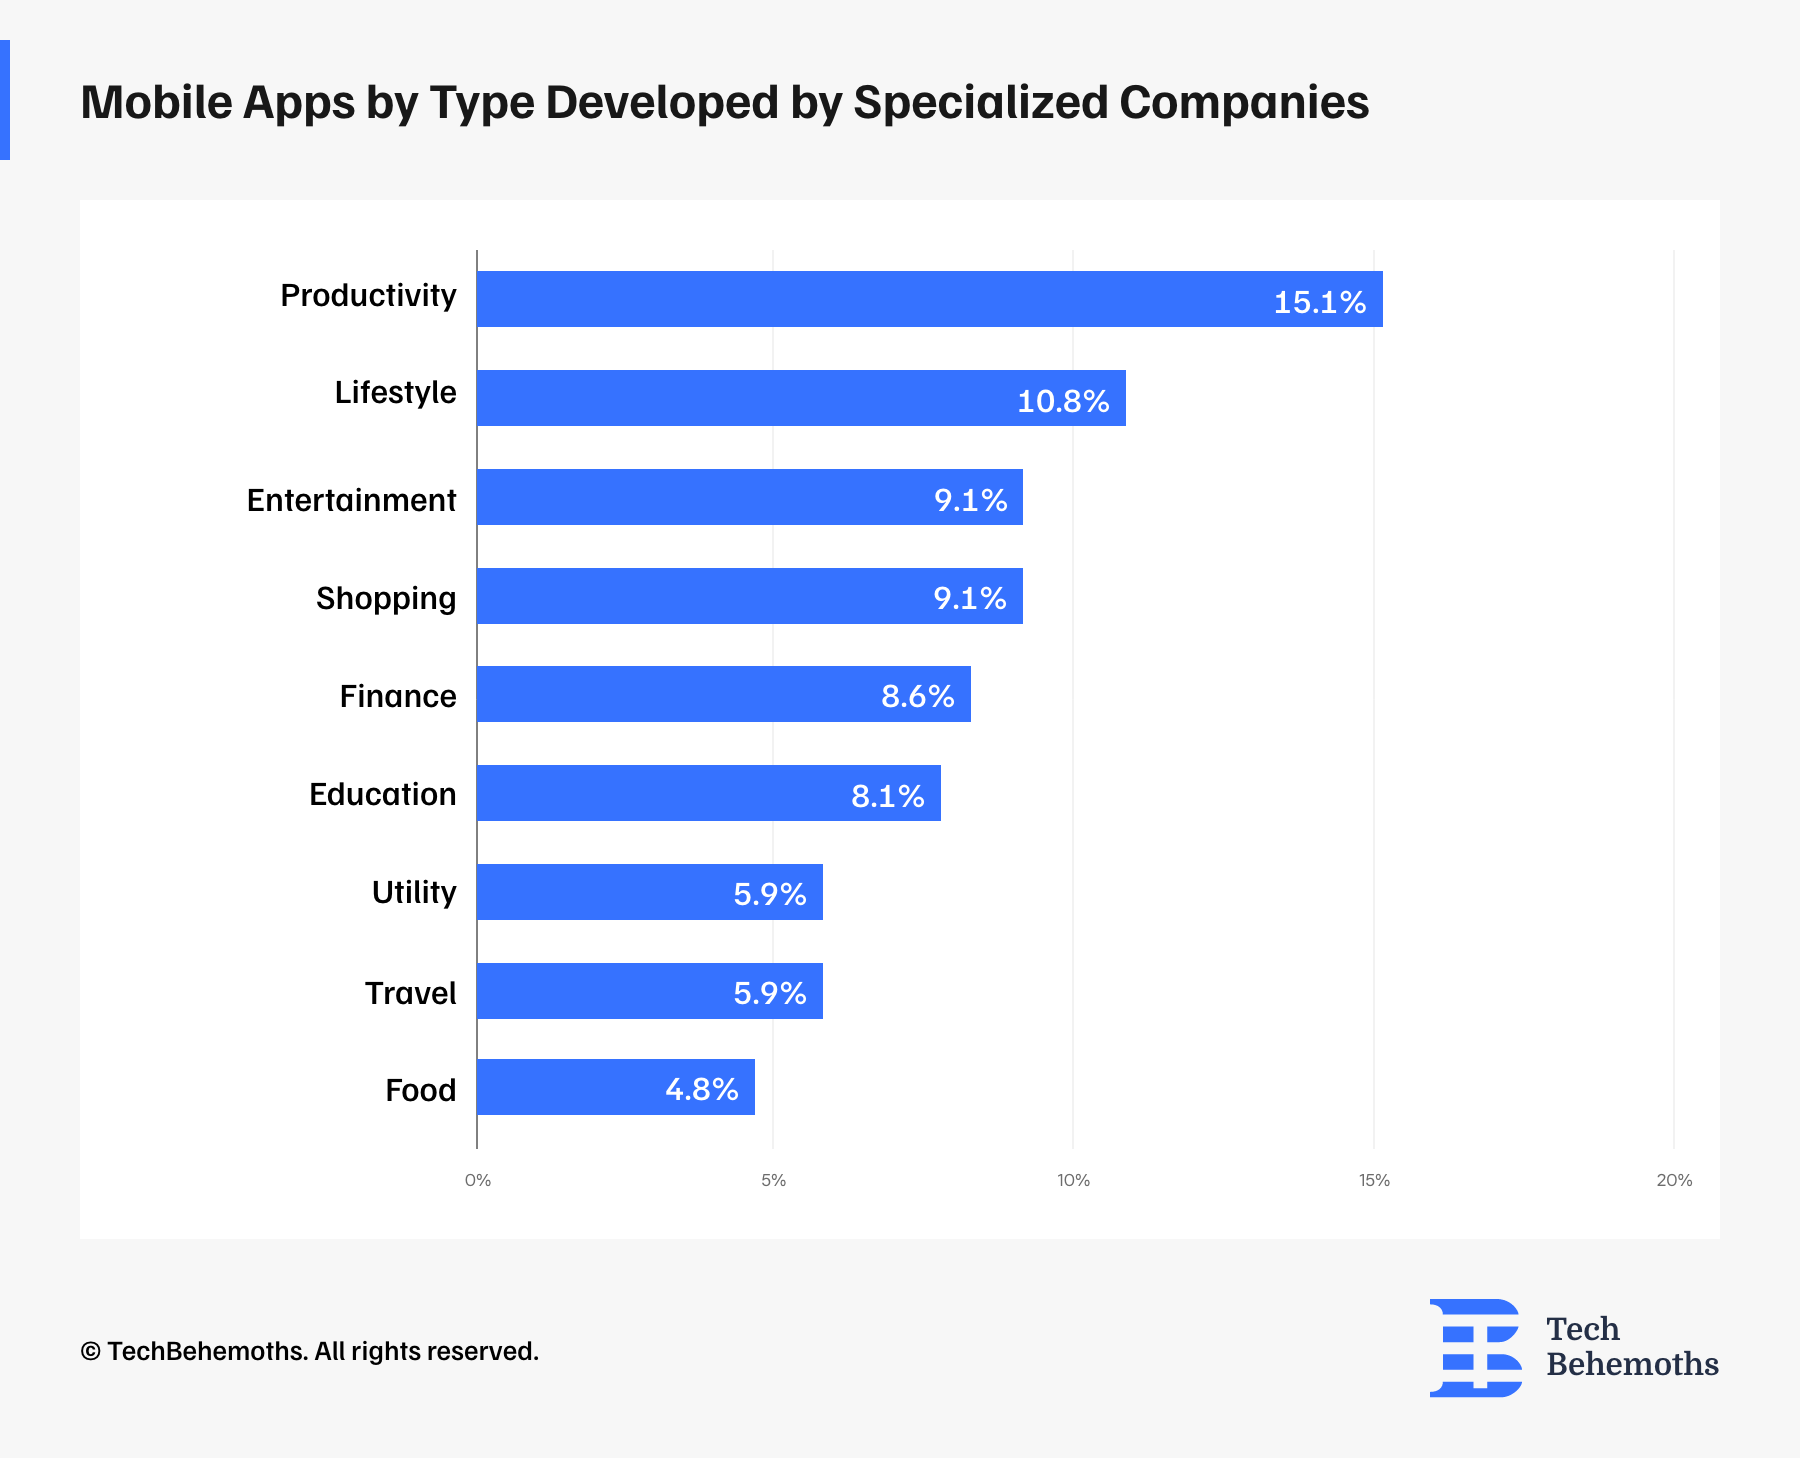 Most popular types of mobile apps developed by specialized companies in 2022-2023